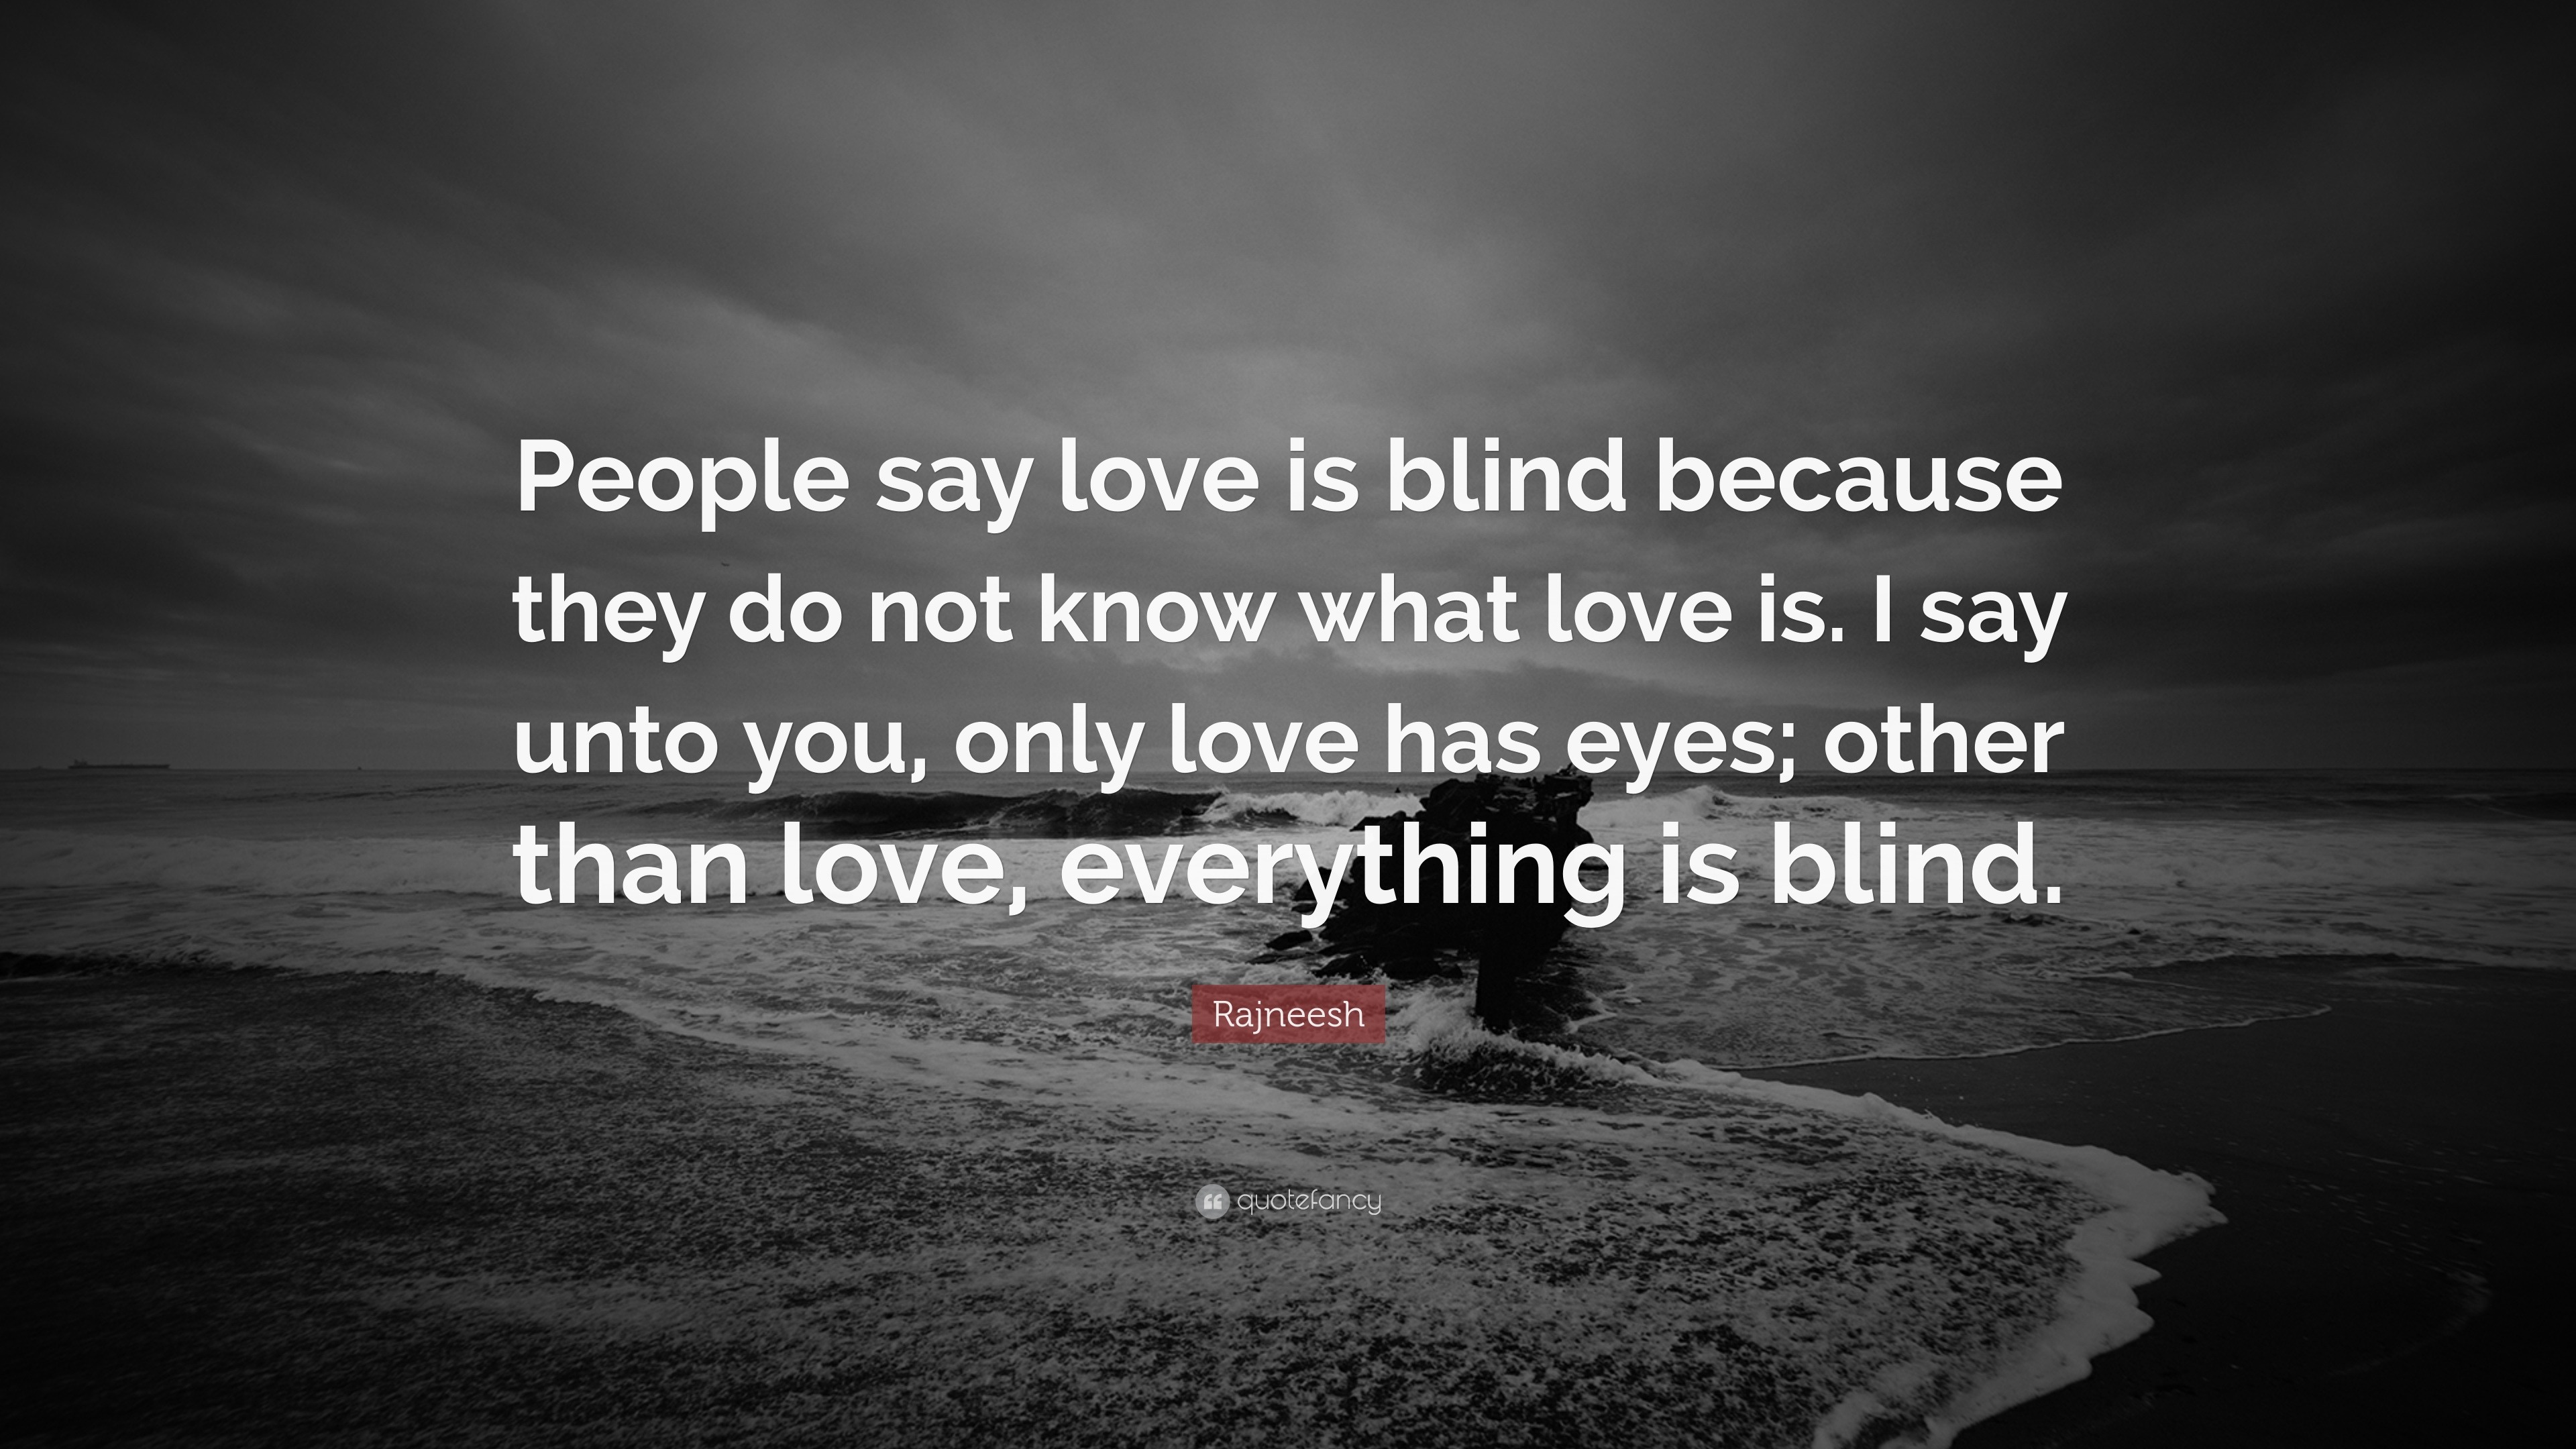 love is blind because